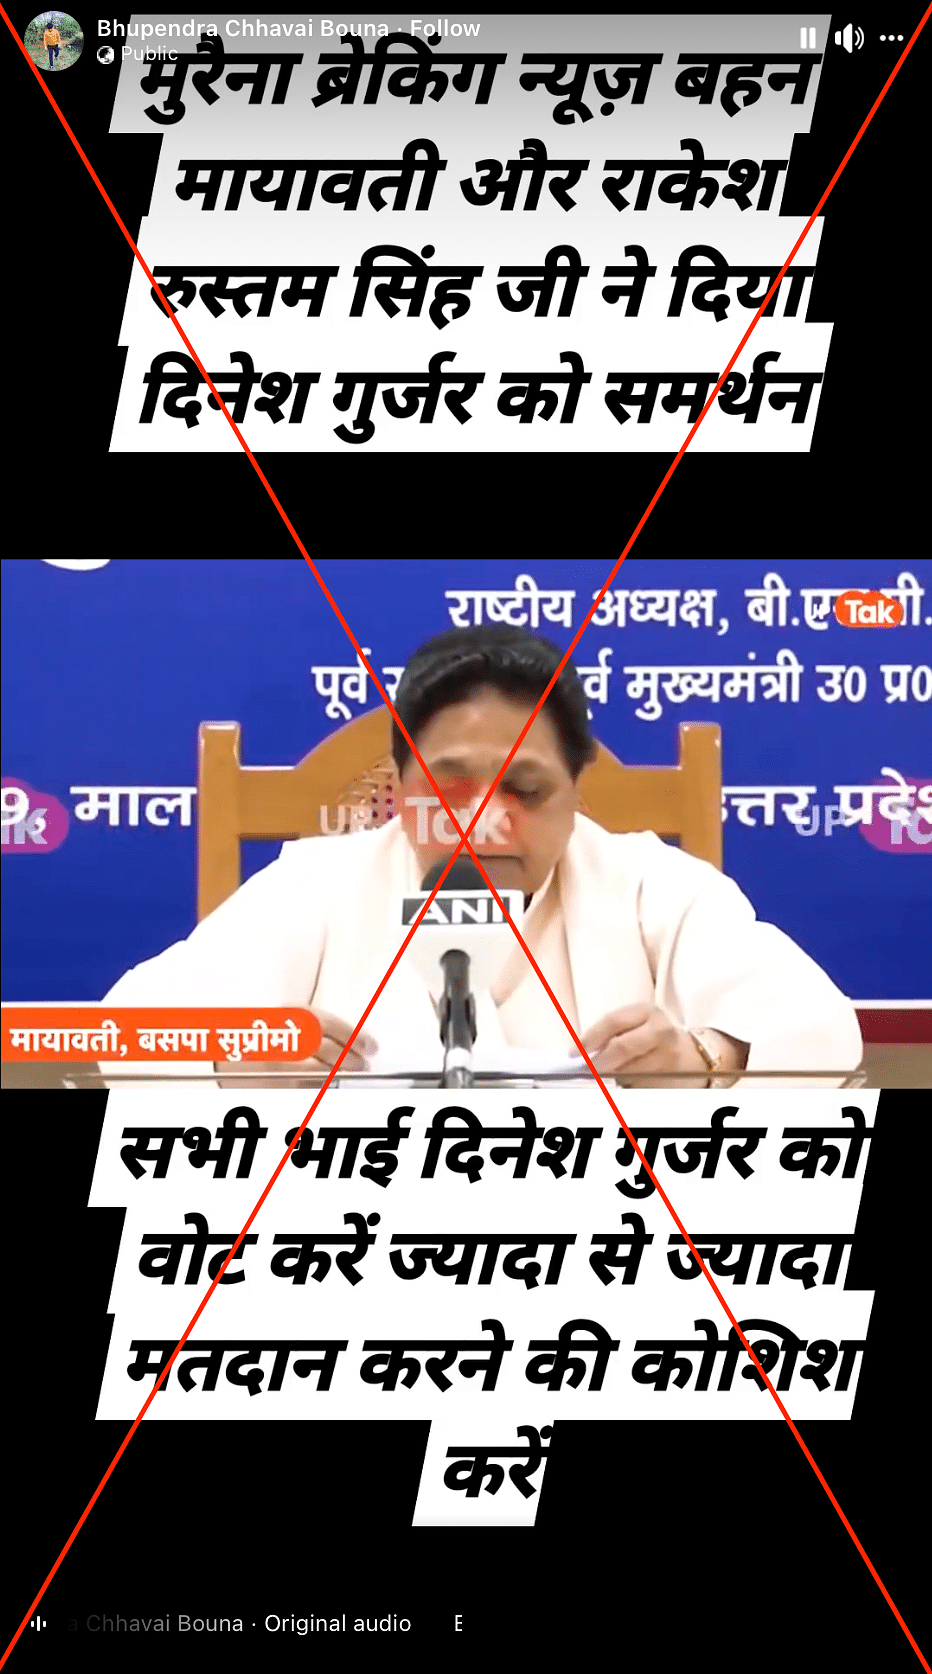 The clip has been altered to claim that BSP supremo Mayawati extended support to the Congress in Madhya Pradesh.